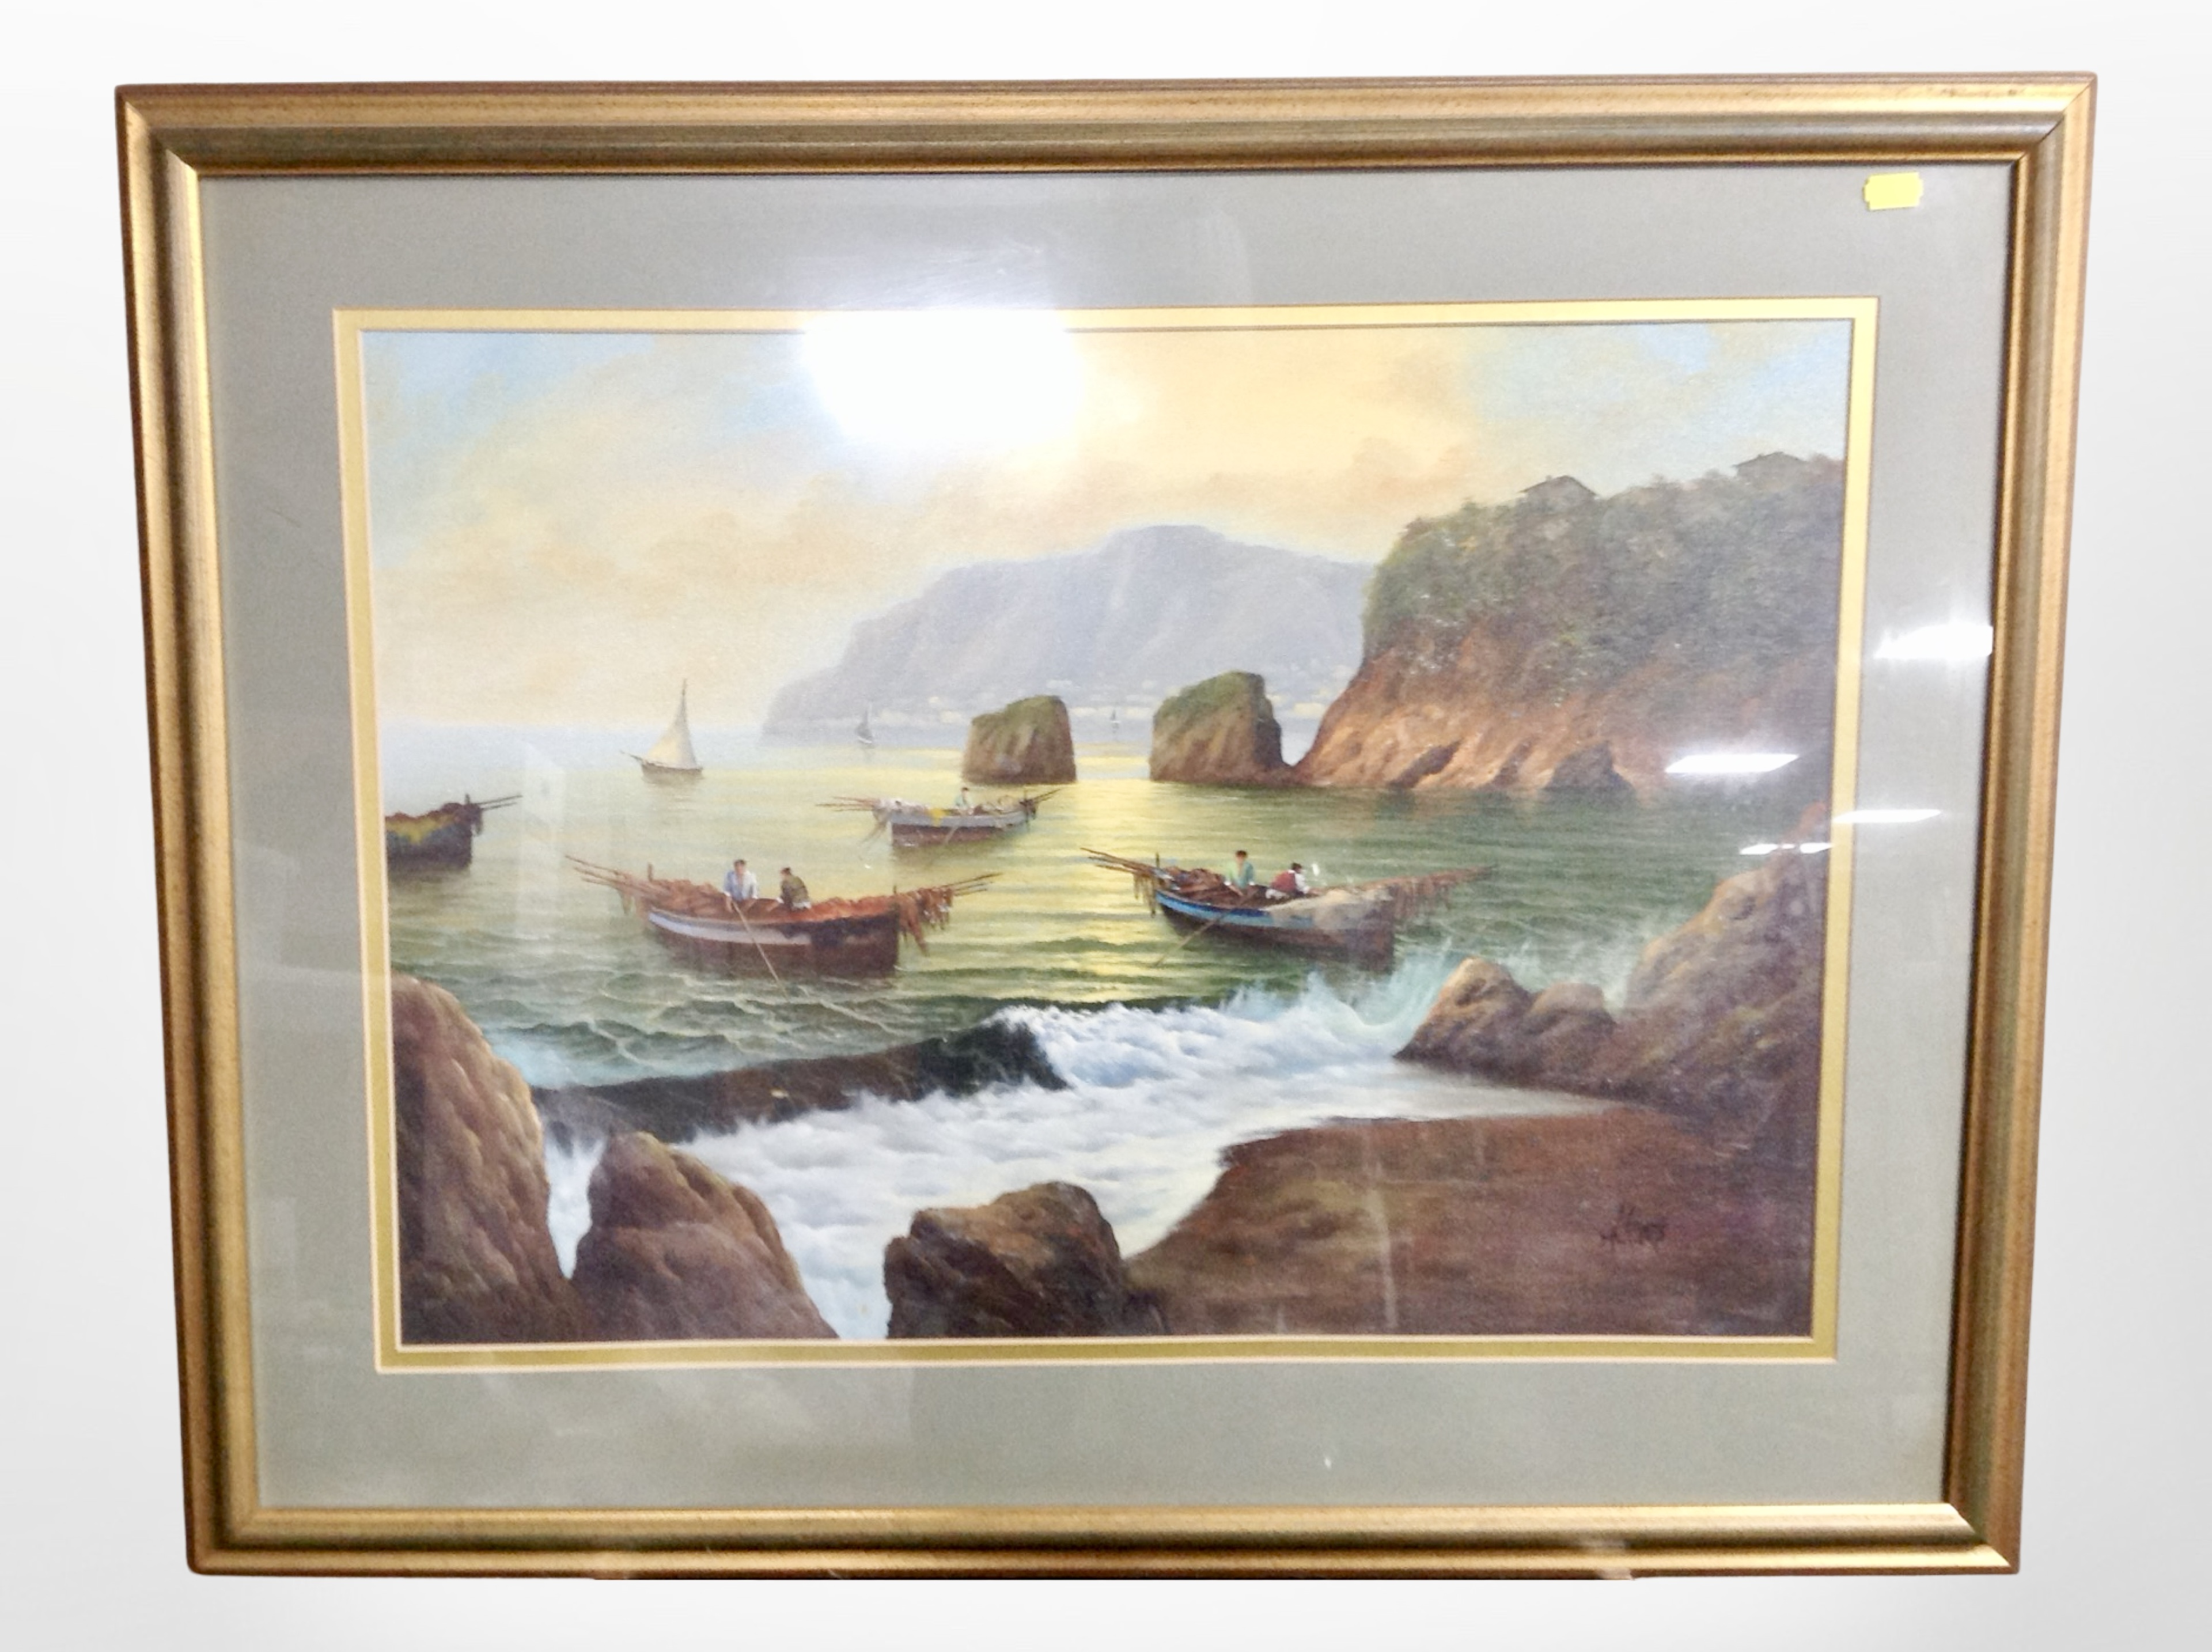 A contemporary oil painting depicting figures in rowing boats and a further limited edition print